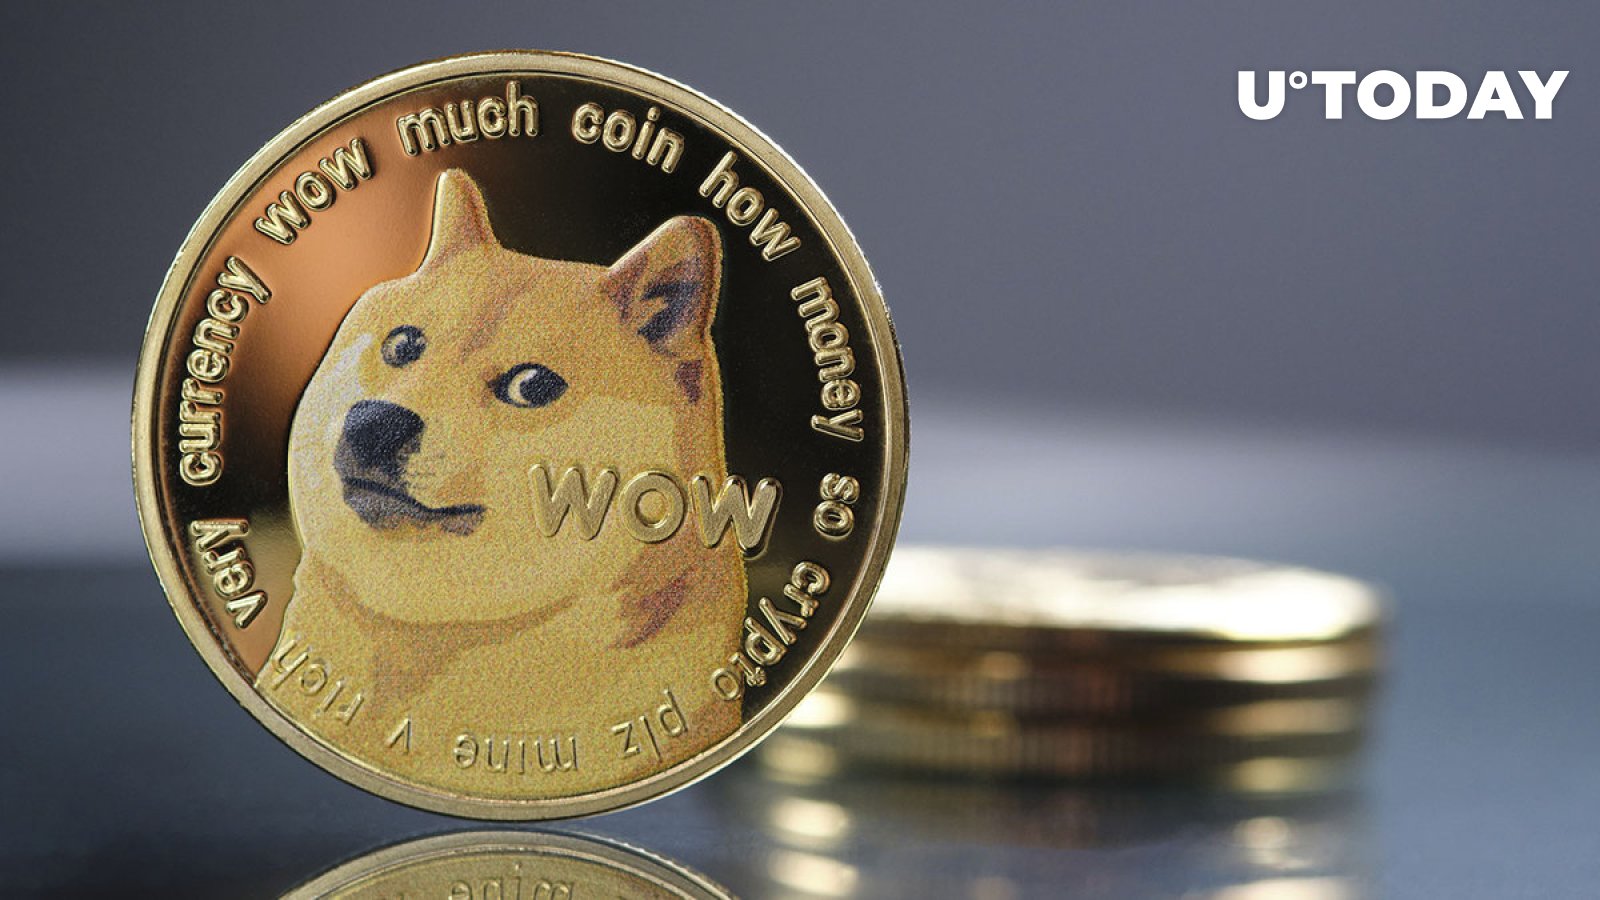 Dogecoin Creator Explains What He Hates About Industry and Why He Created DOGE